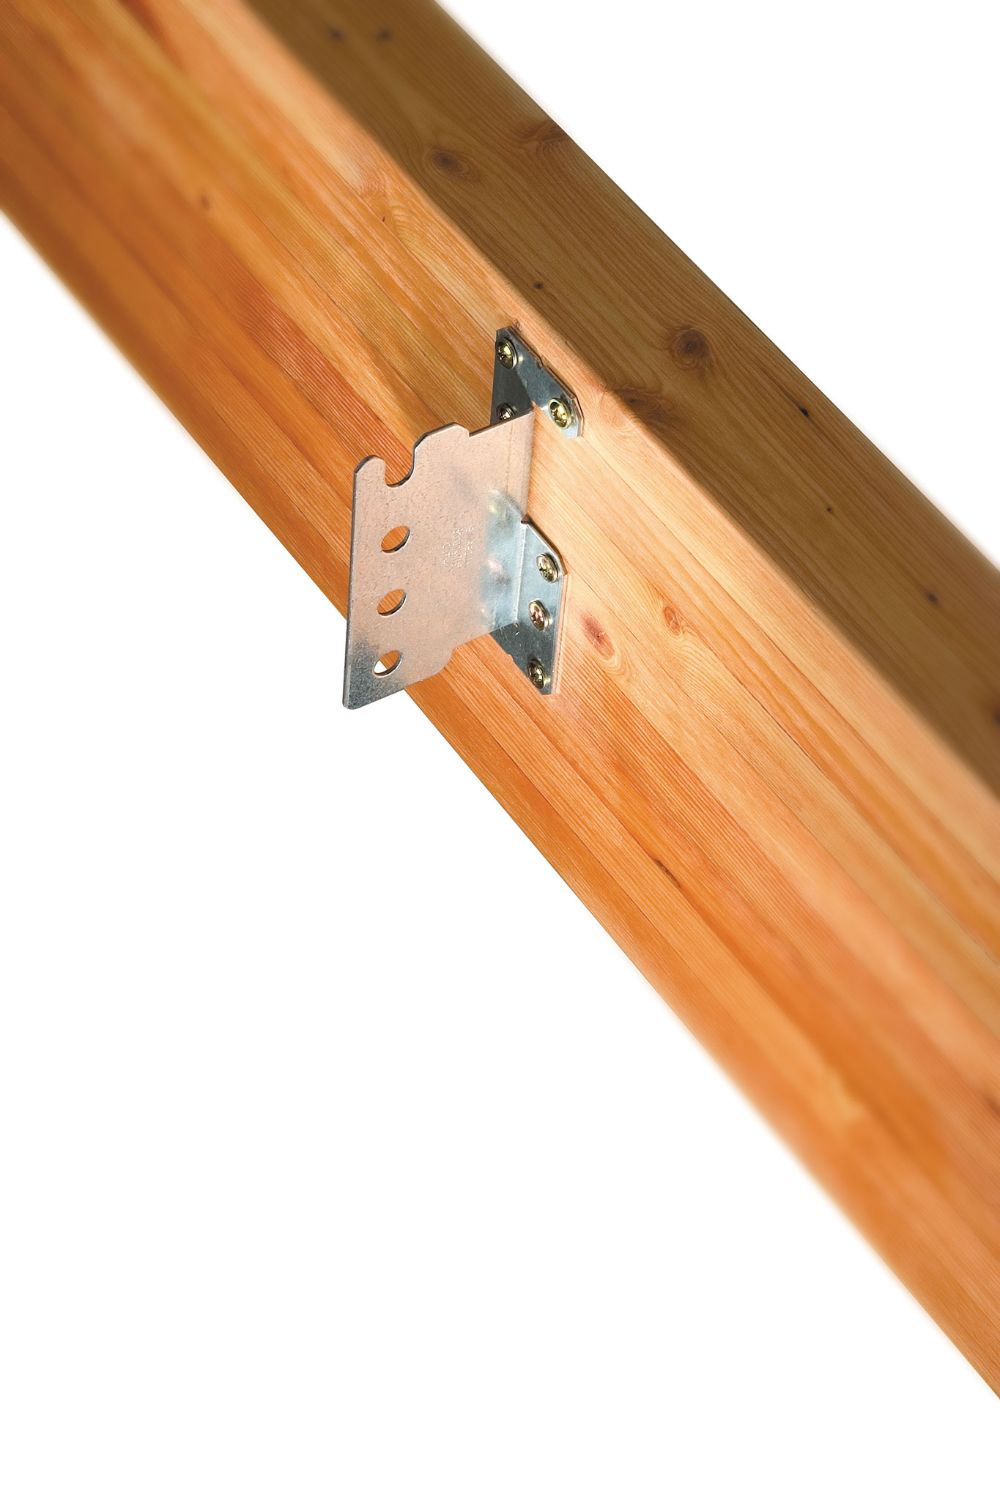 Simpson CJT6ZL Concealed Joist Tie w Long Pins ZMAX Finish image 2 of 5